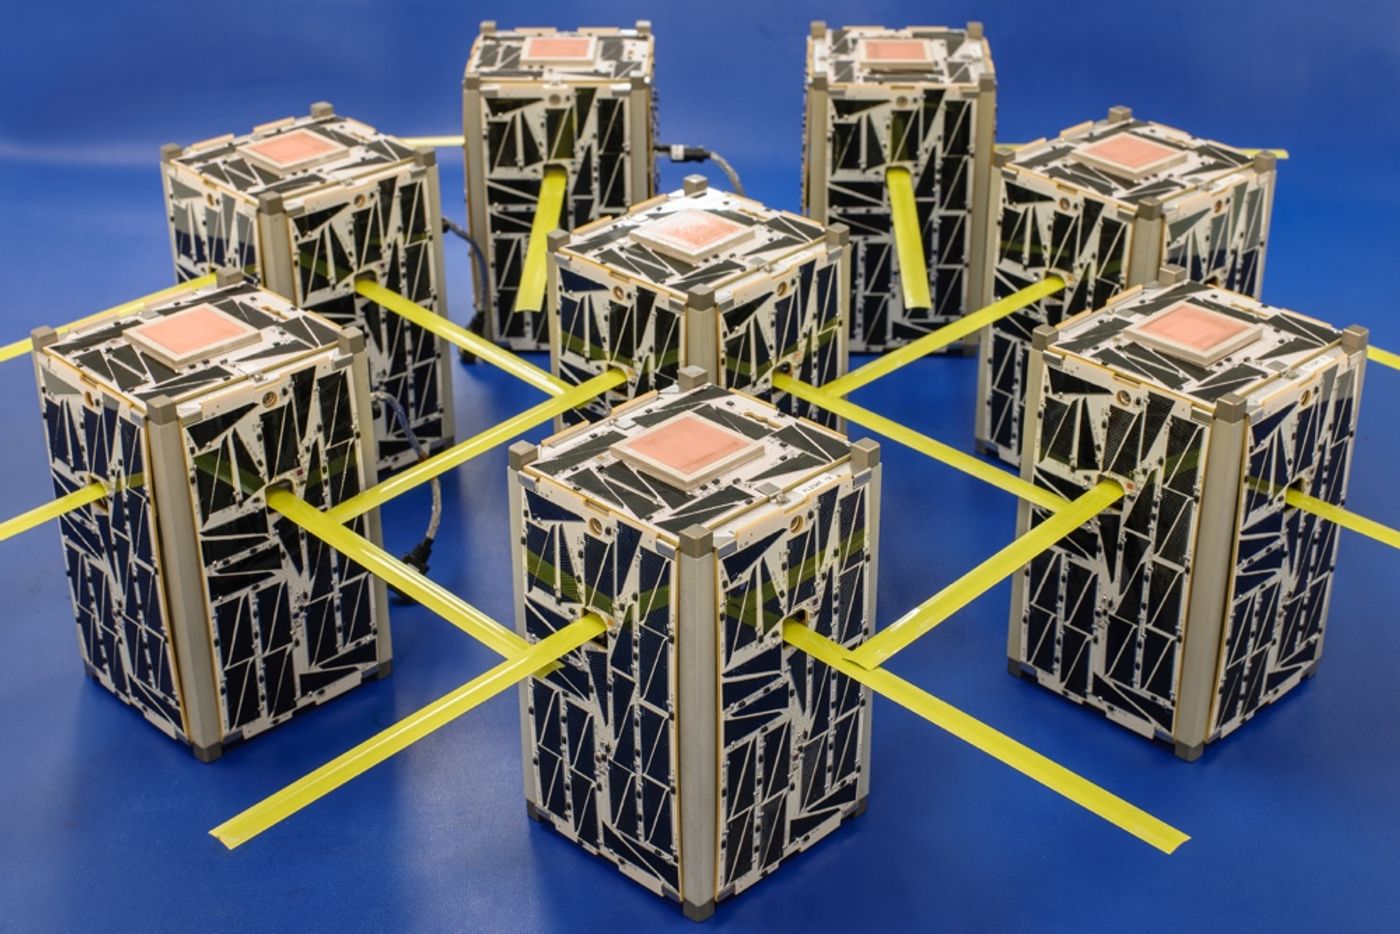 Smallsats range in size, but are limited to 180kg. They can help make space exploration more tangible for scientists.